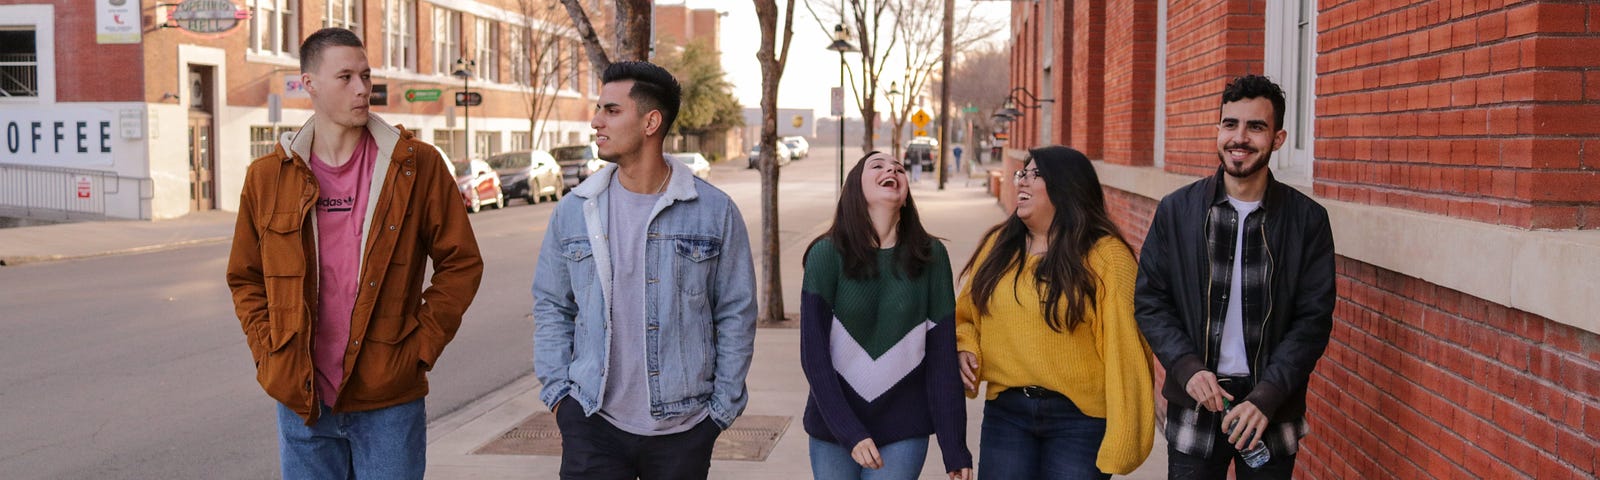 Image of young people walking along a street laughing